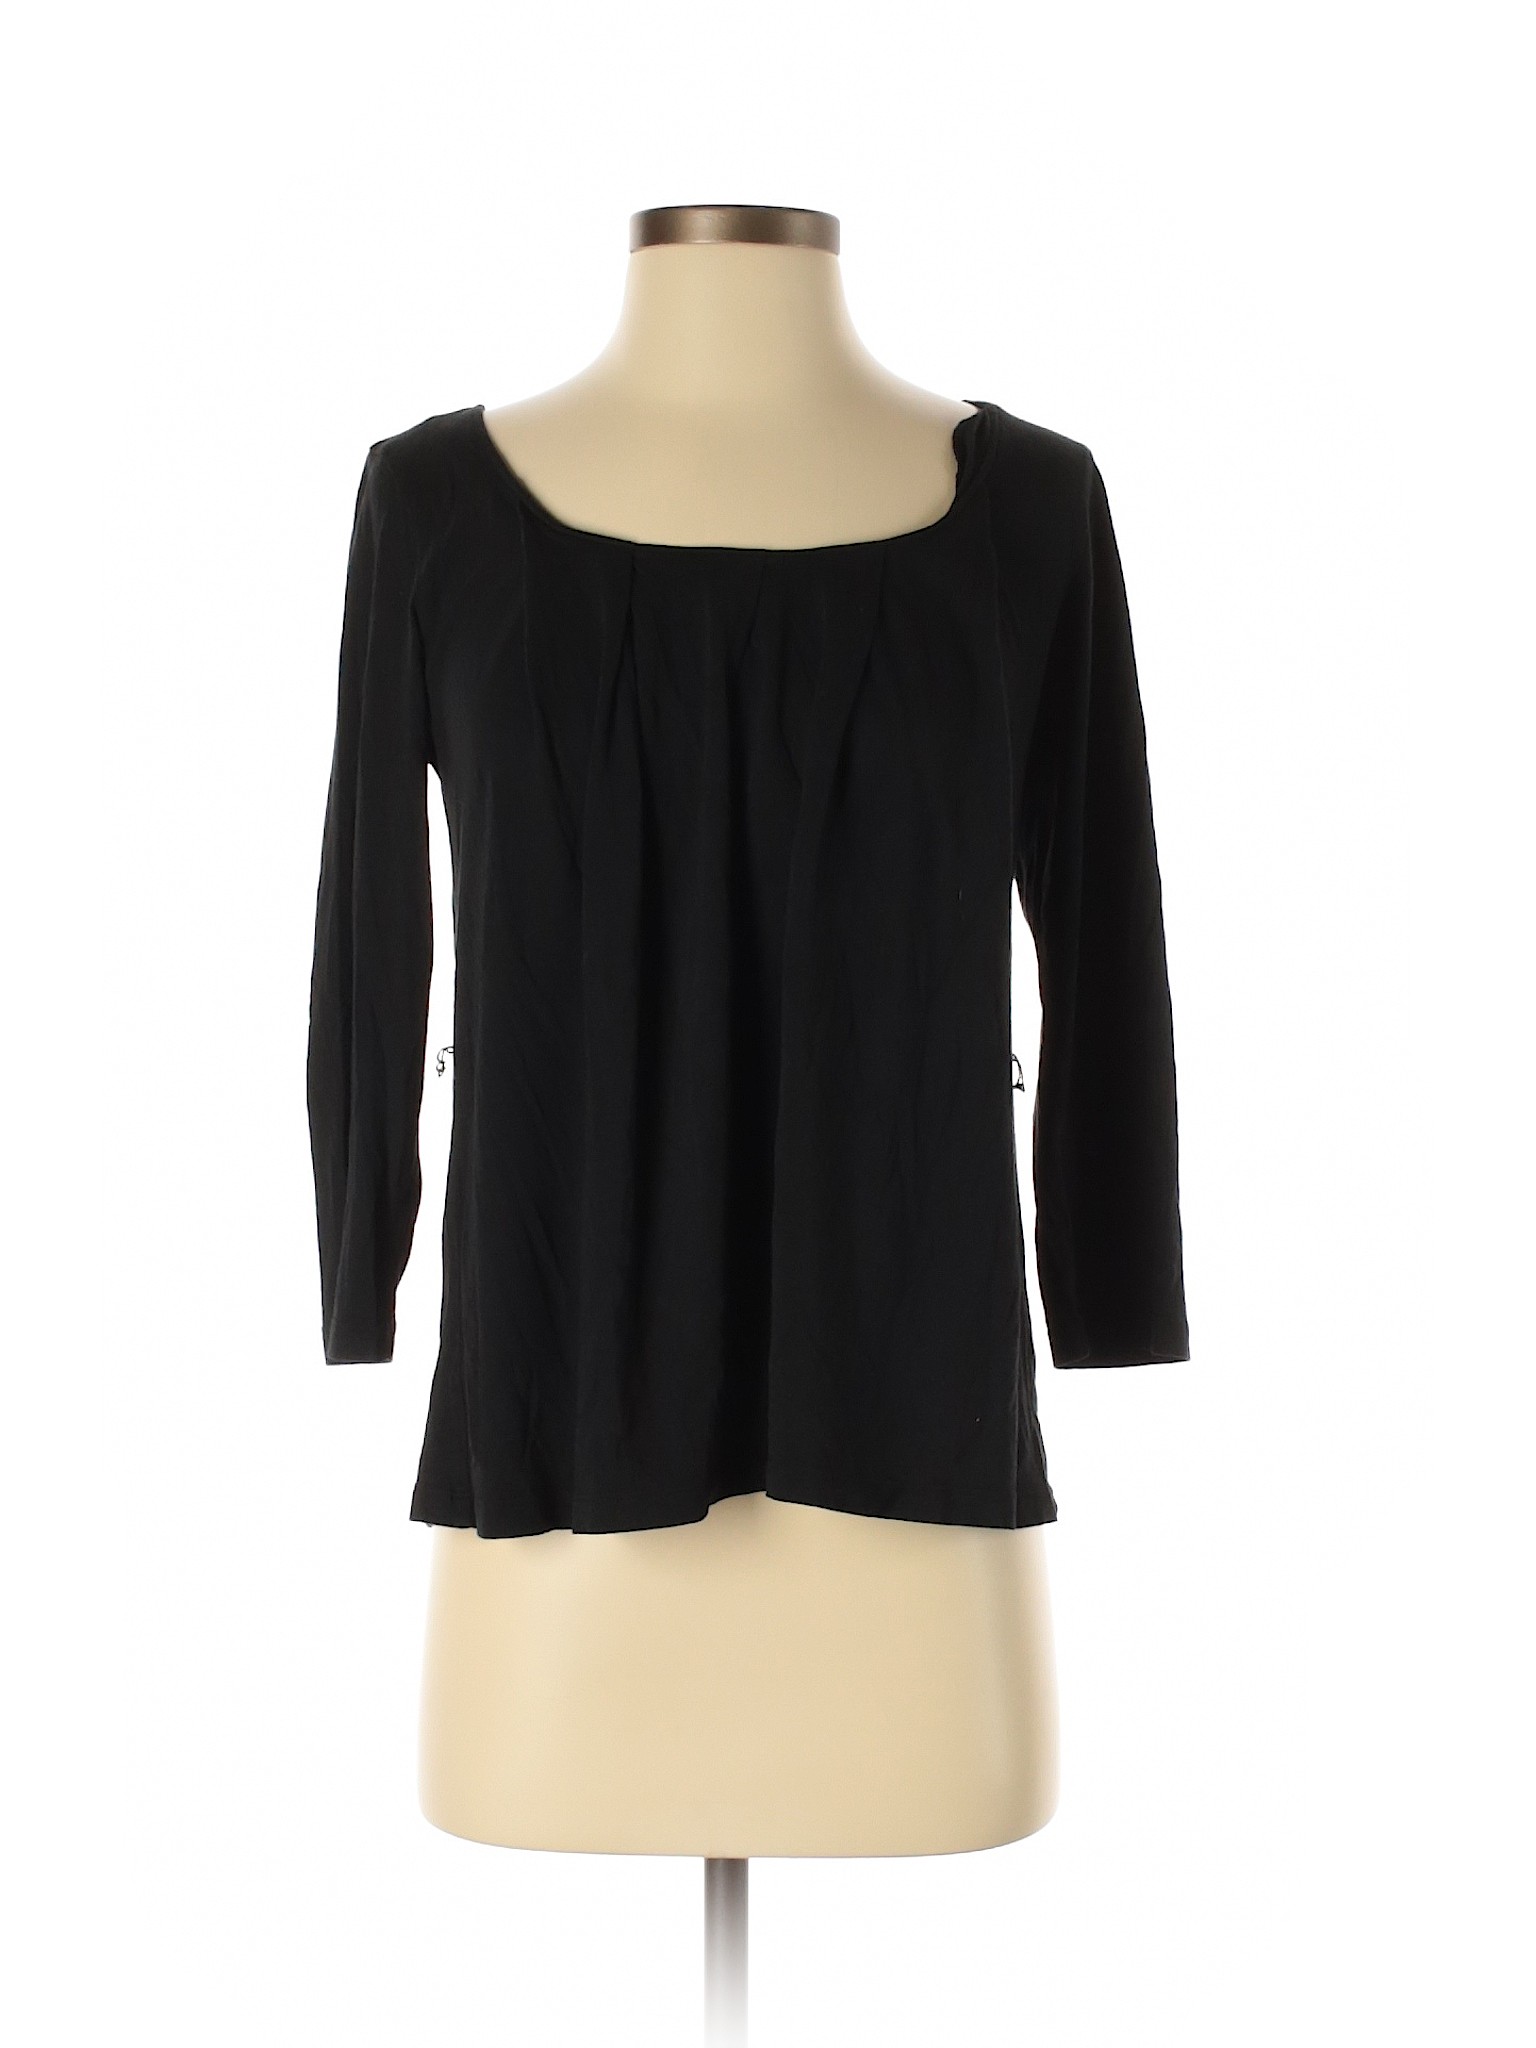 The Limited Women Black 3/4 Sleeve Top S | eBay